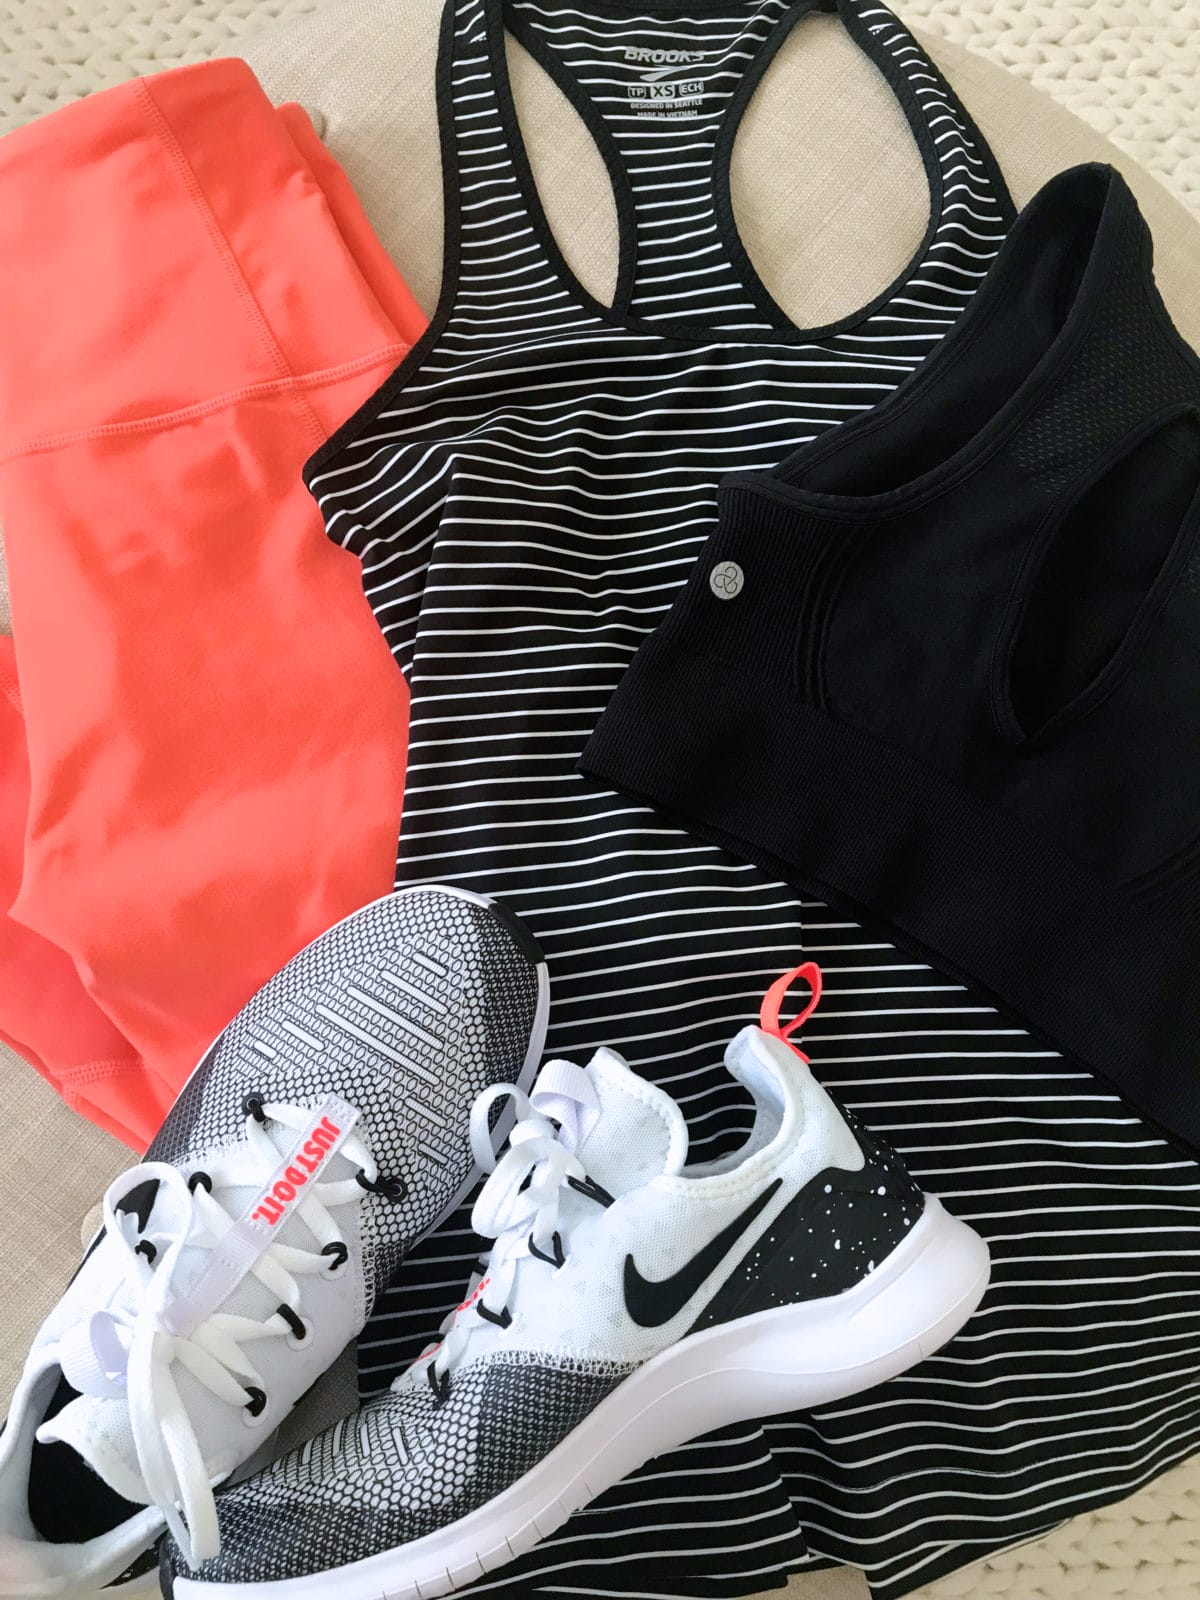 Outfits @ HotHeatSneakers Part 1. Which one was your favorite? #fyp #s, Sneaker Outfits